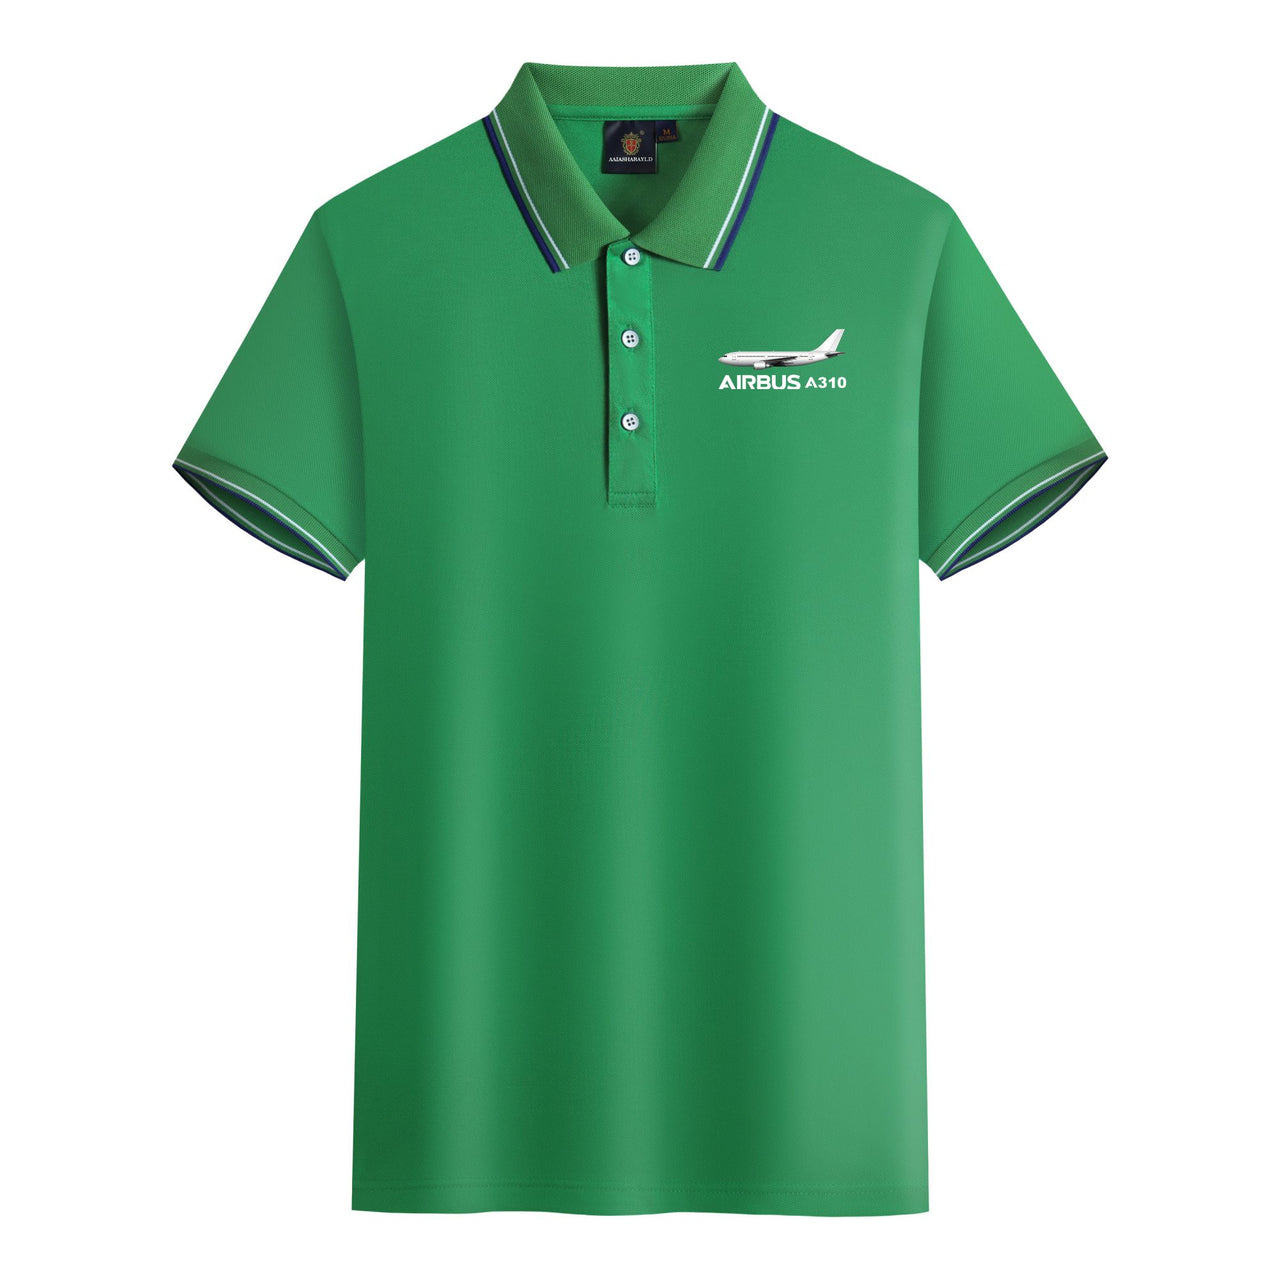 The Airbus A310 Designed Stylish Polo T-Shirts